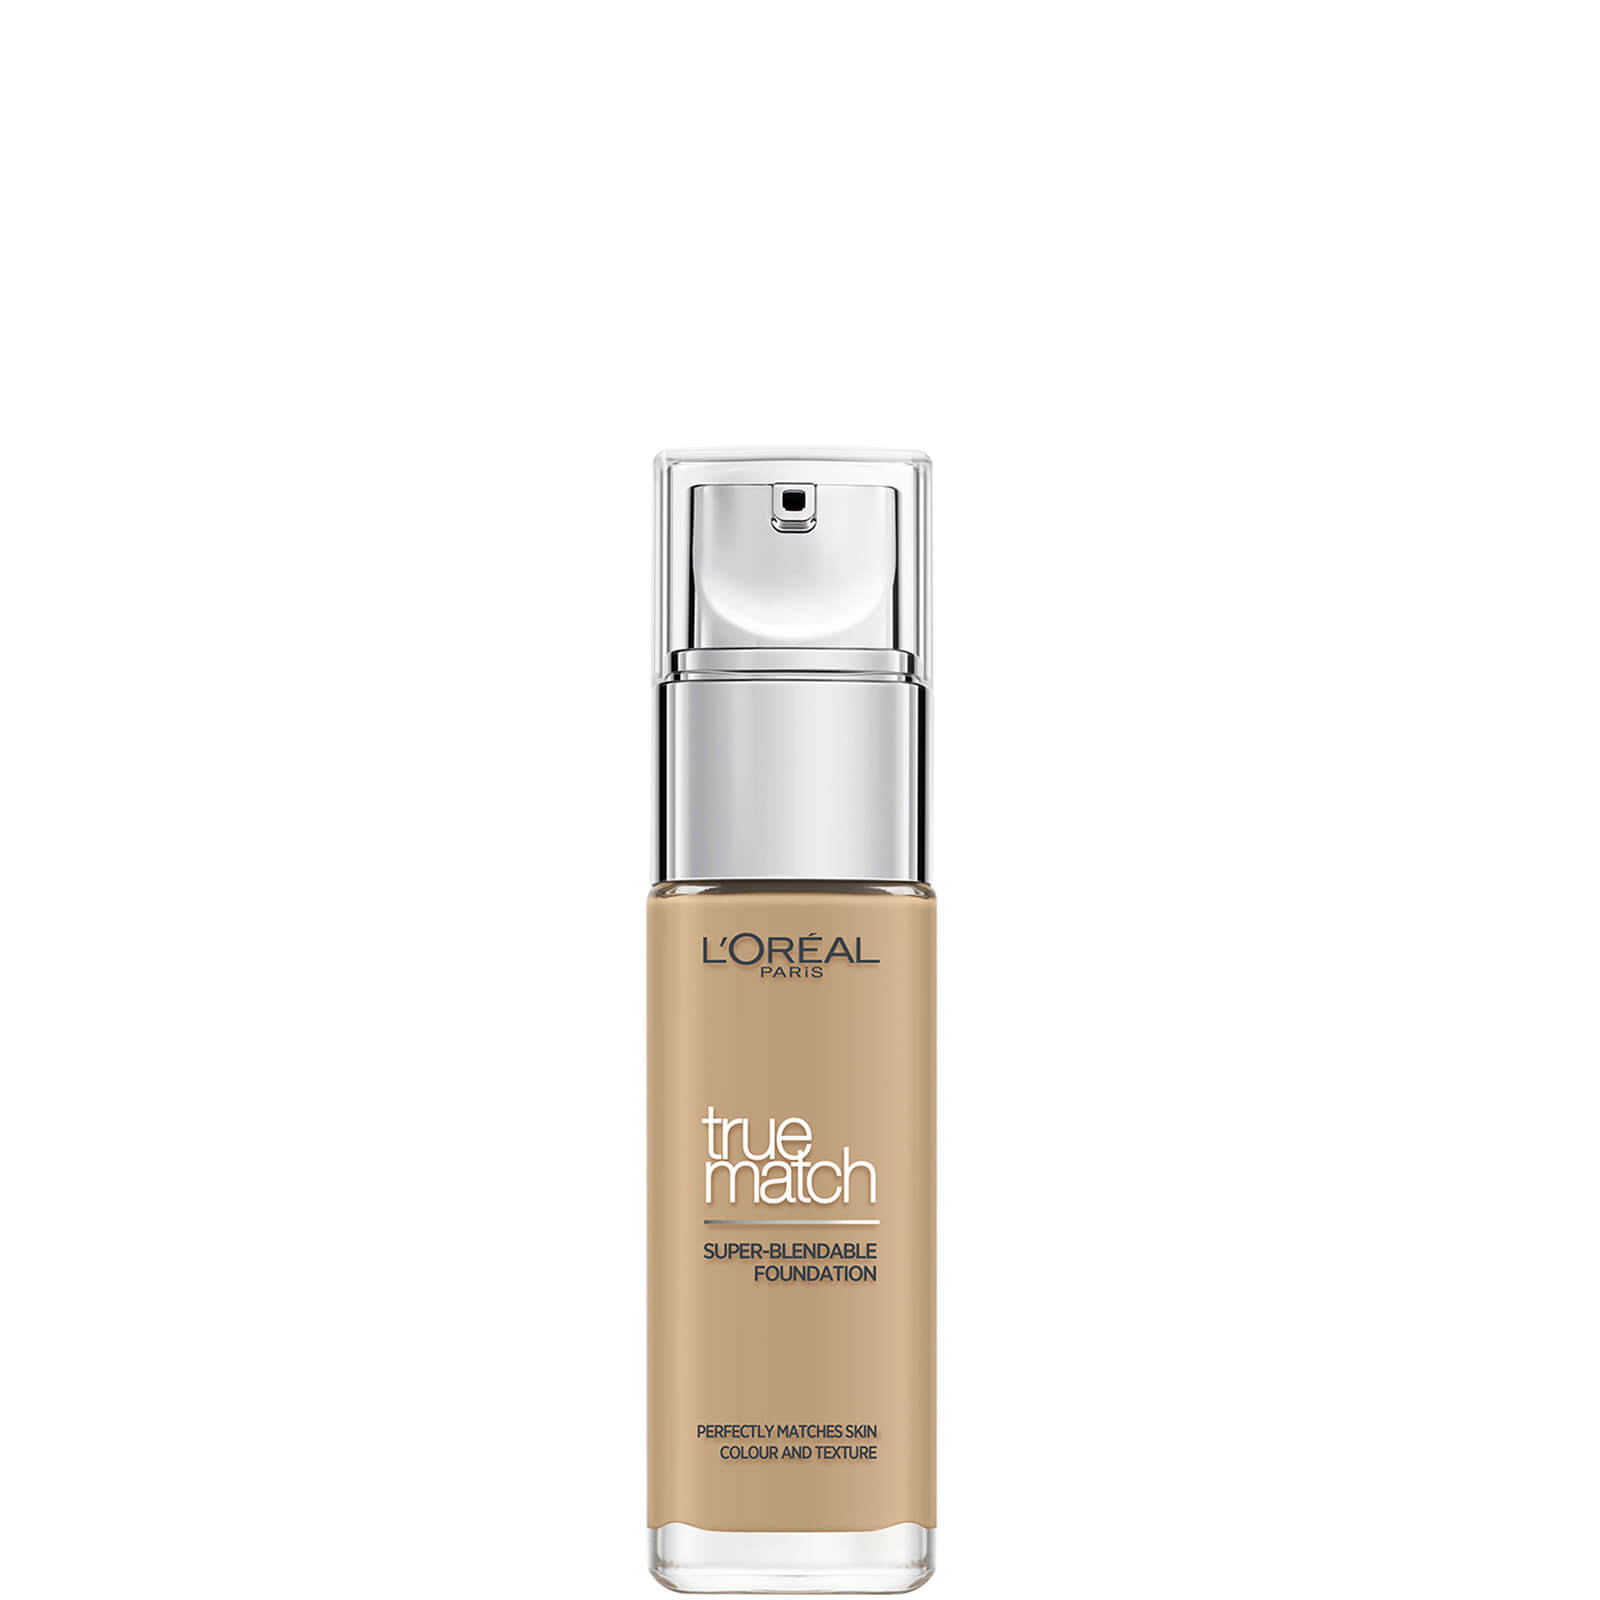 L'Oréal Paris True Match Liquid Foundation with SPF and Hyaluronic Acid 30ml (Various Shades) - 28 Golden Beige